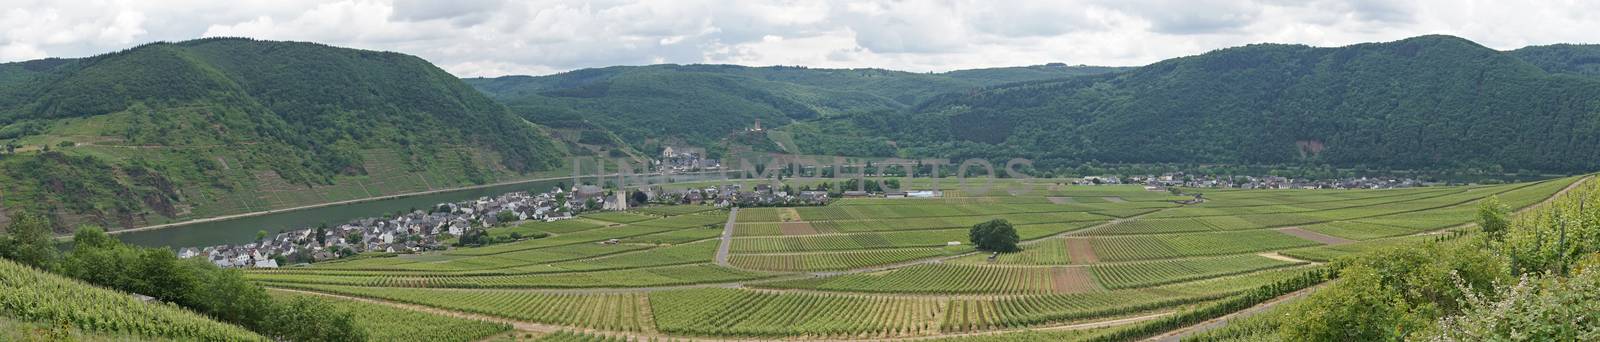 Moselle valley, Germany by alfotokunst